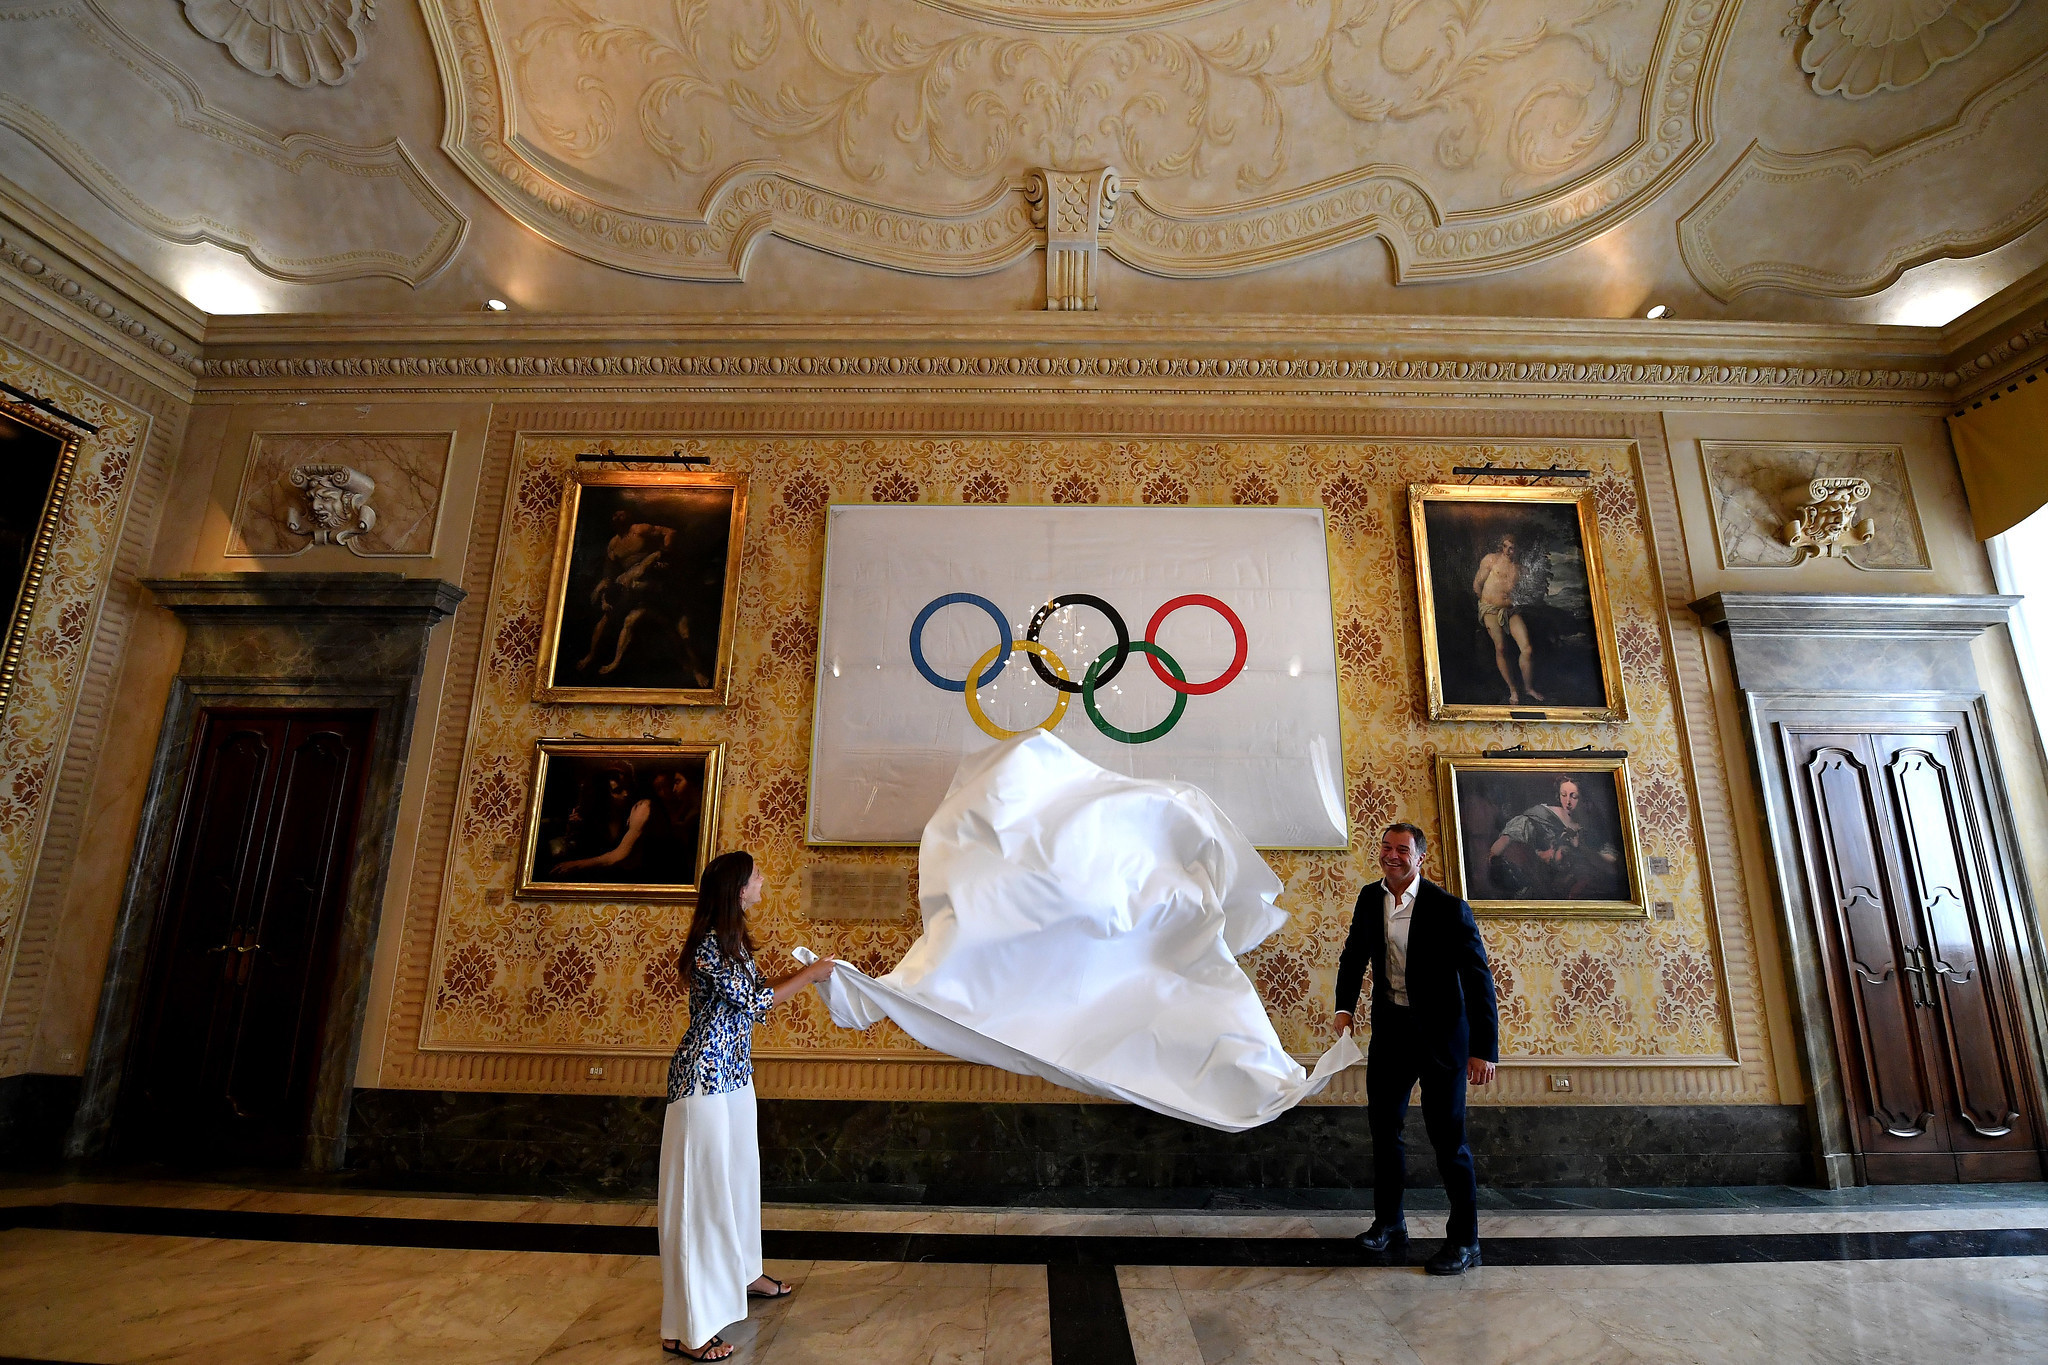 The Palazzo Marino serves as Milan's City Hall and now displays an Olympic flag ©Comune di Milano